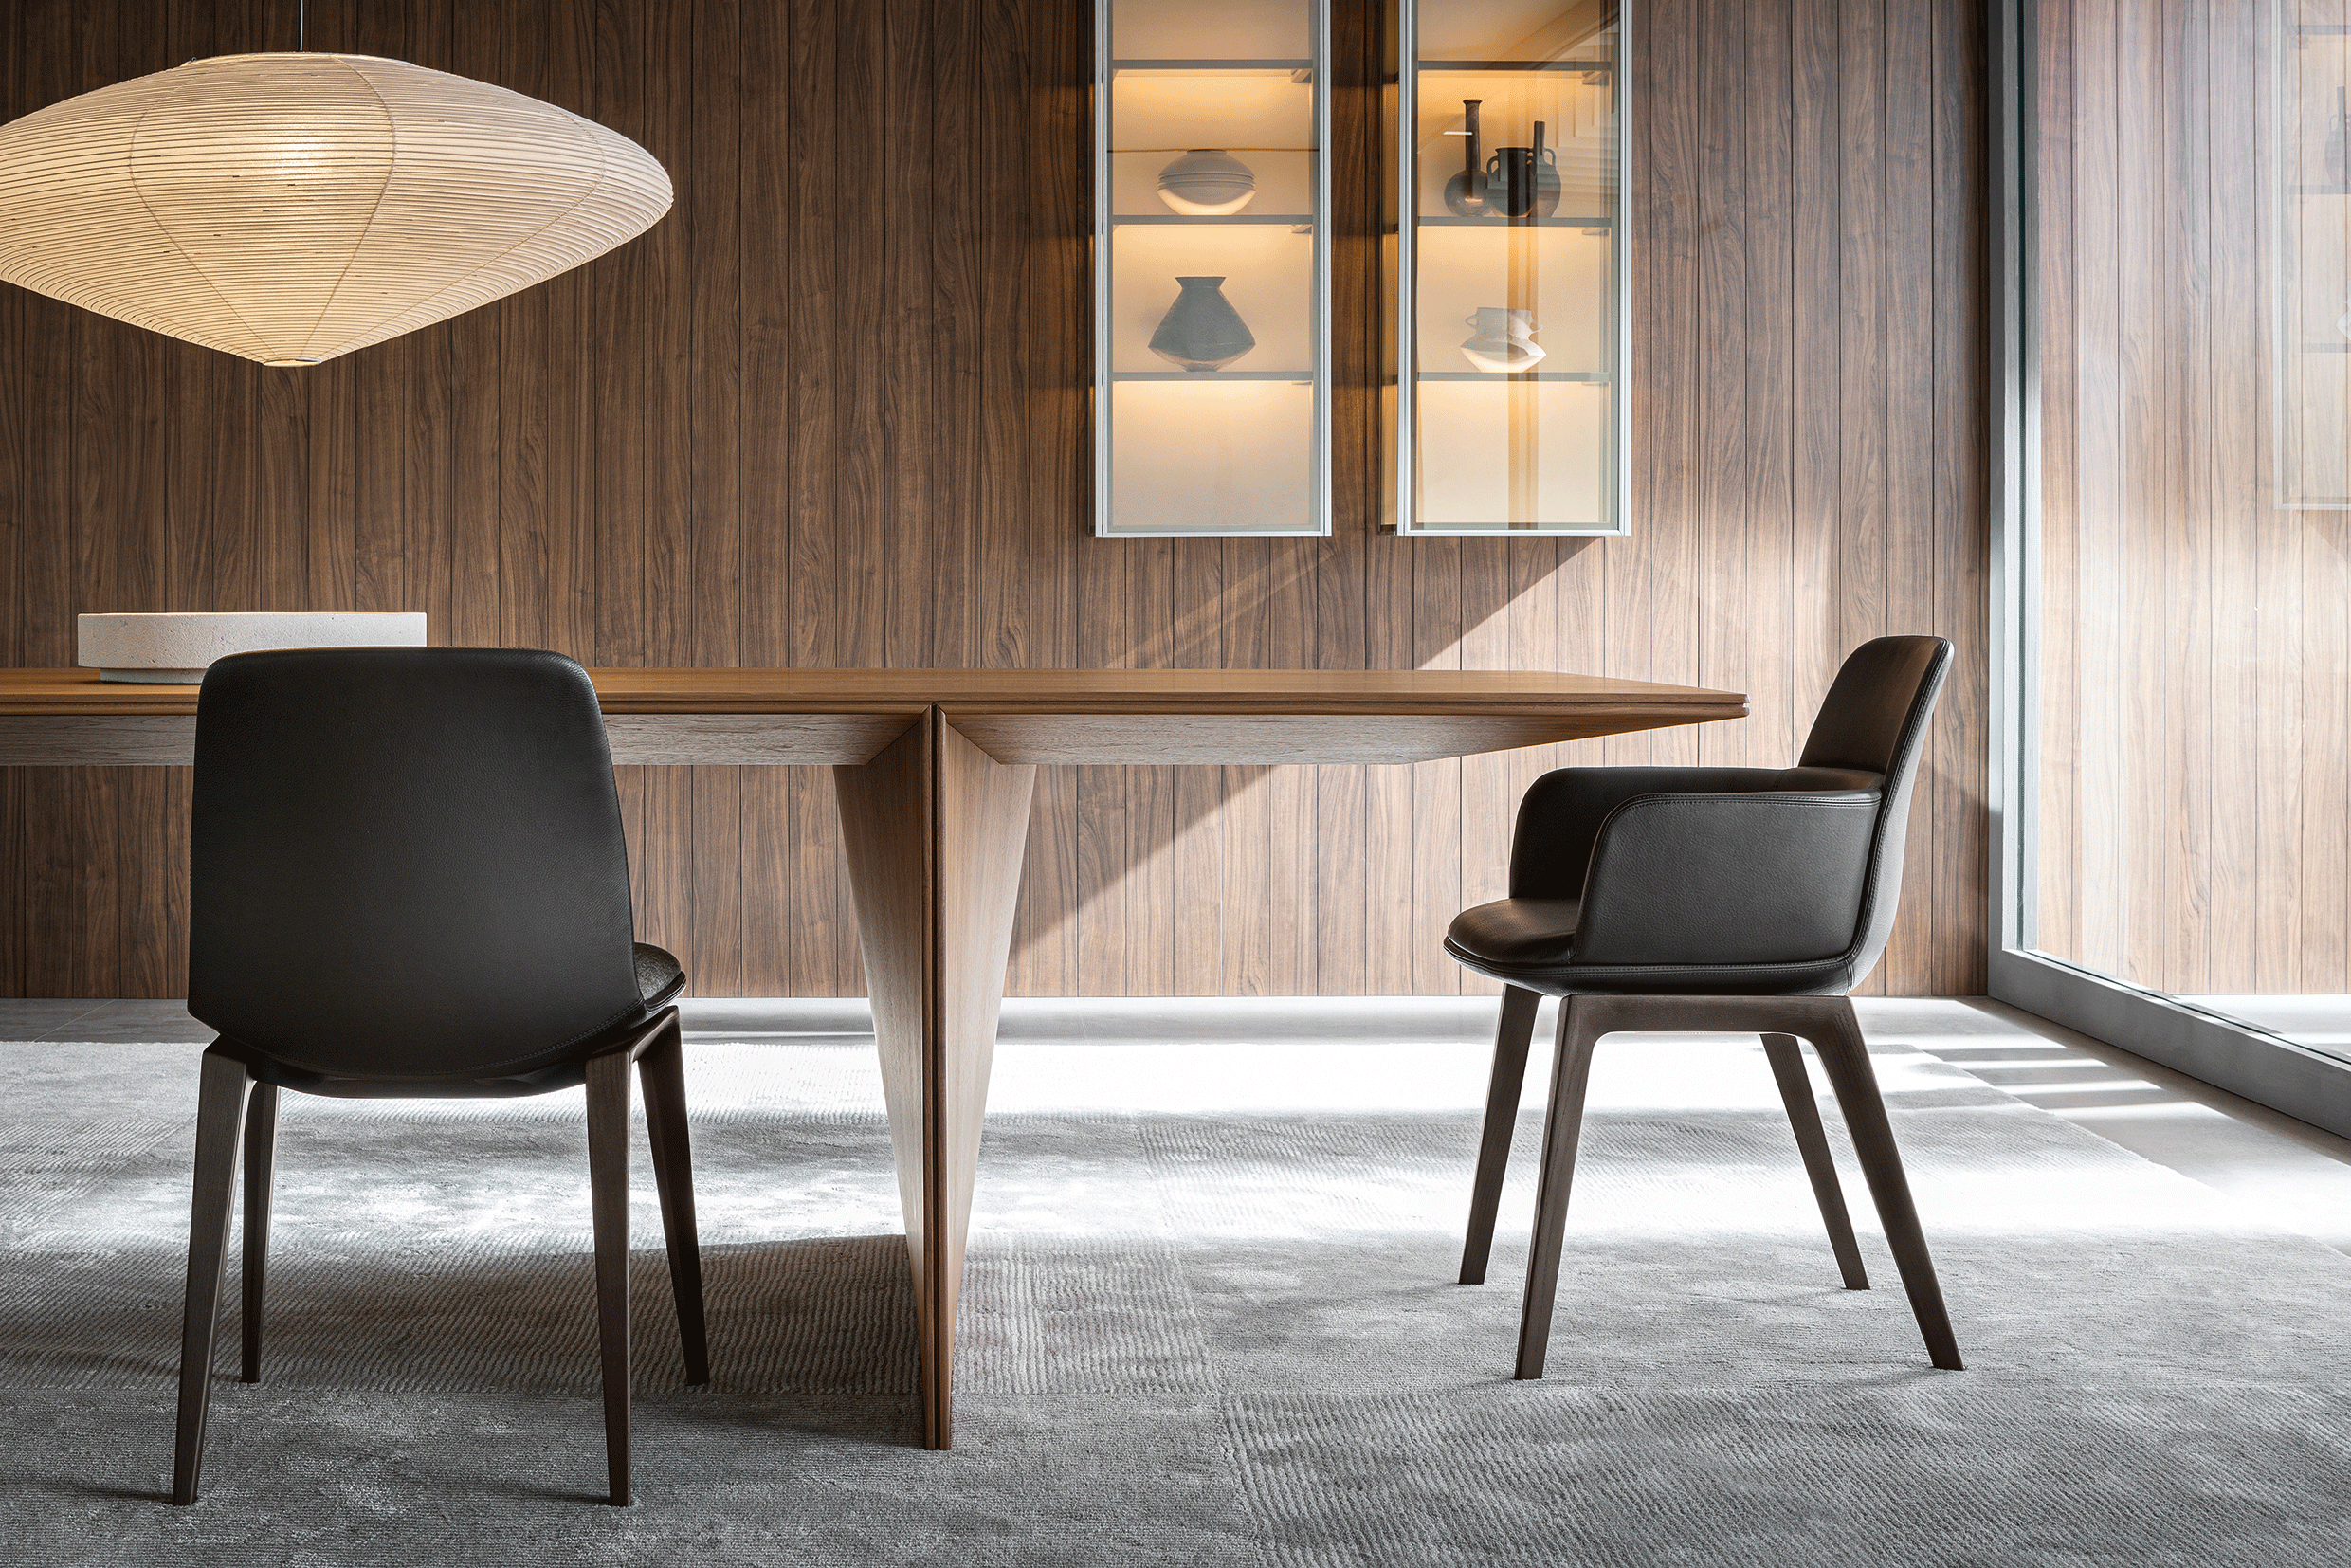 wooden table detail with black leather chairs